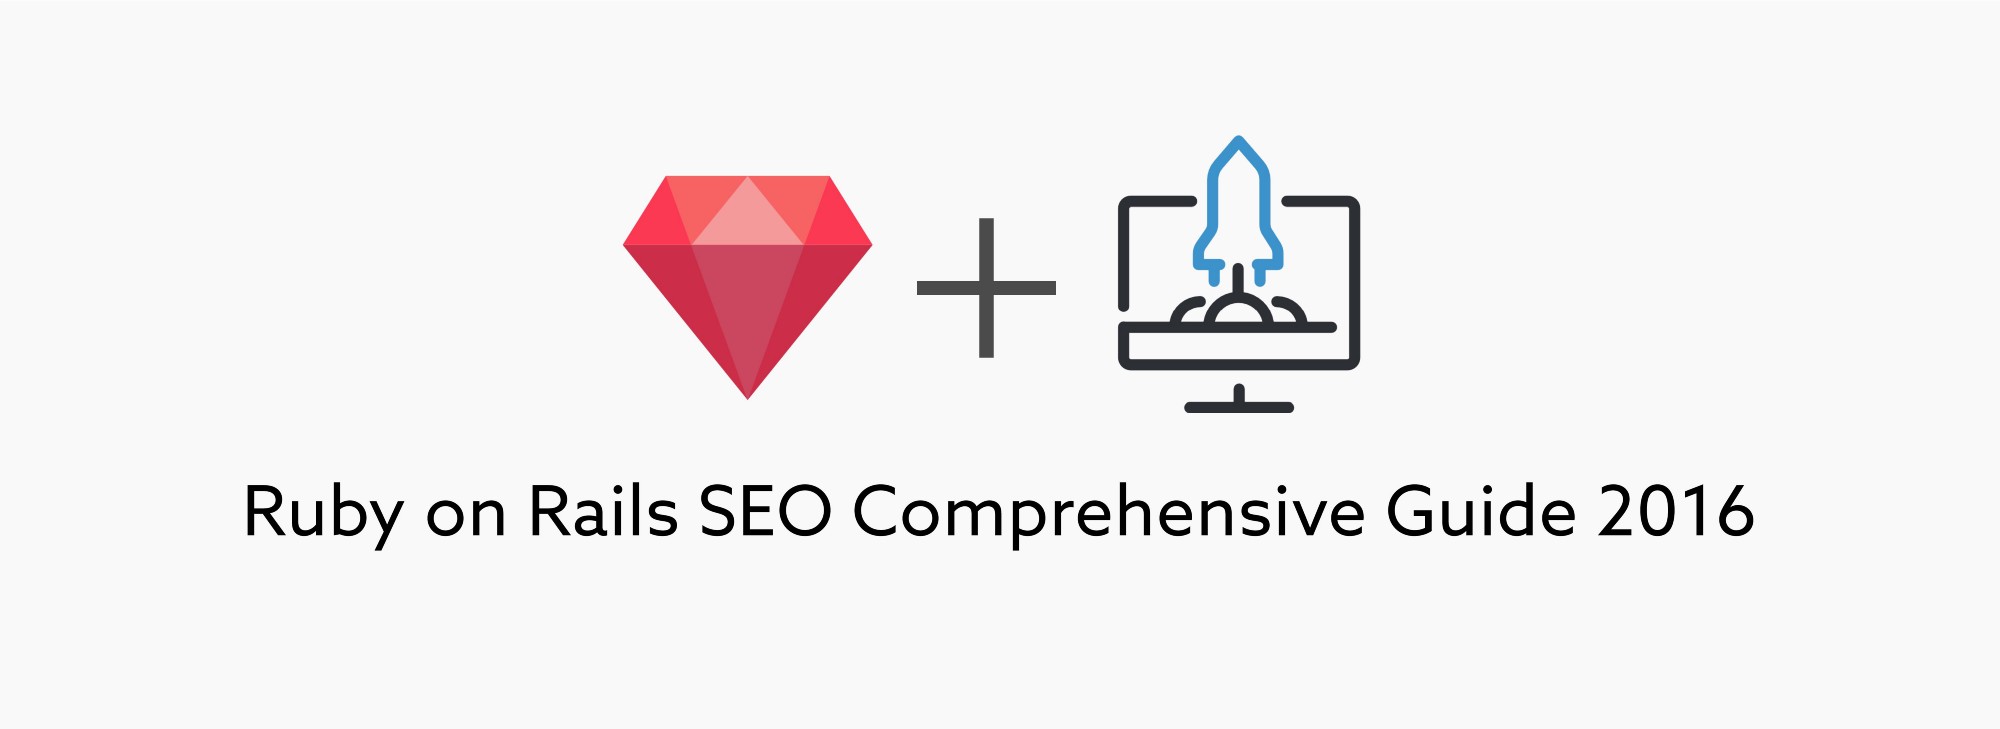 Comprehensive-guide-on-SEO-in-Rails